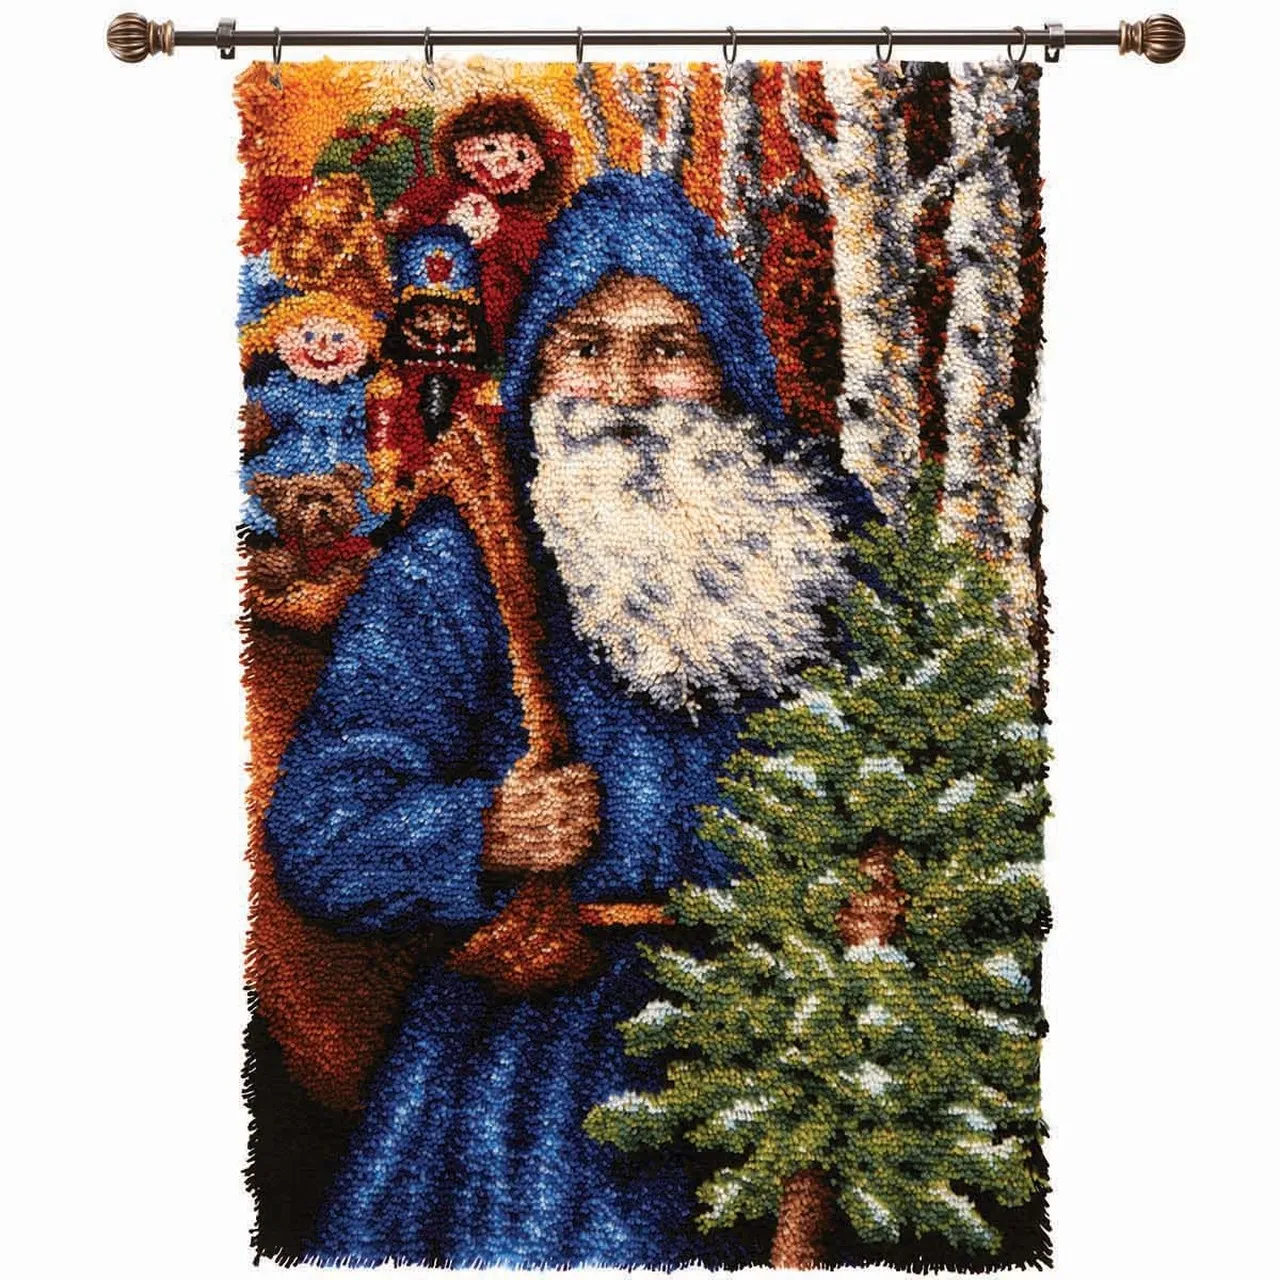 

Latch Hook Rug Kits Father Frost Wall Tapestry DIY Carpet Rug Pre-Printed Canvas with Non-Skid Backing Floor Mat 69x102cm